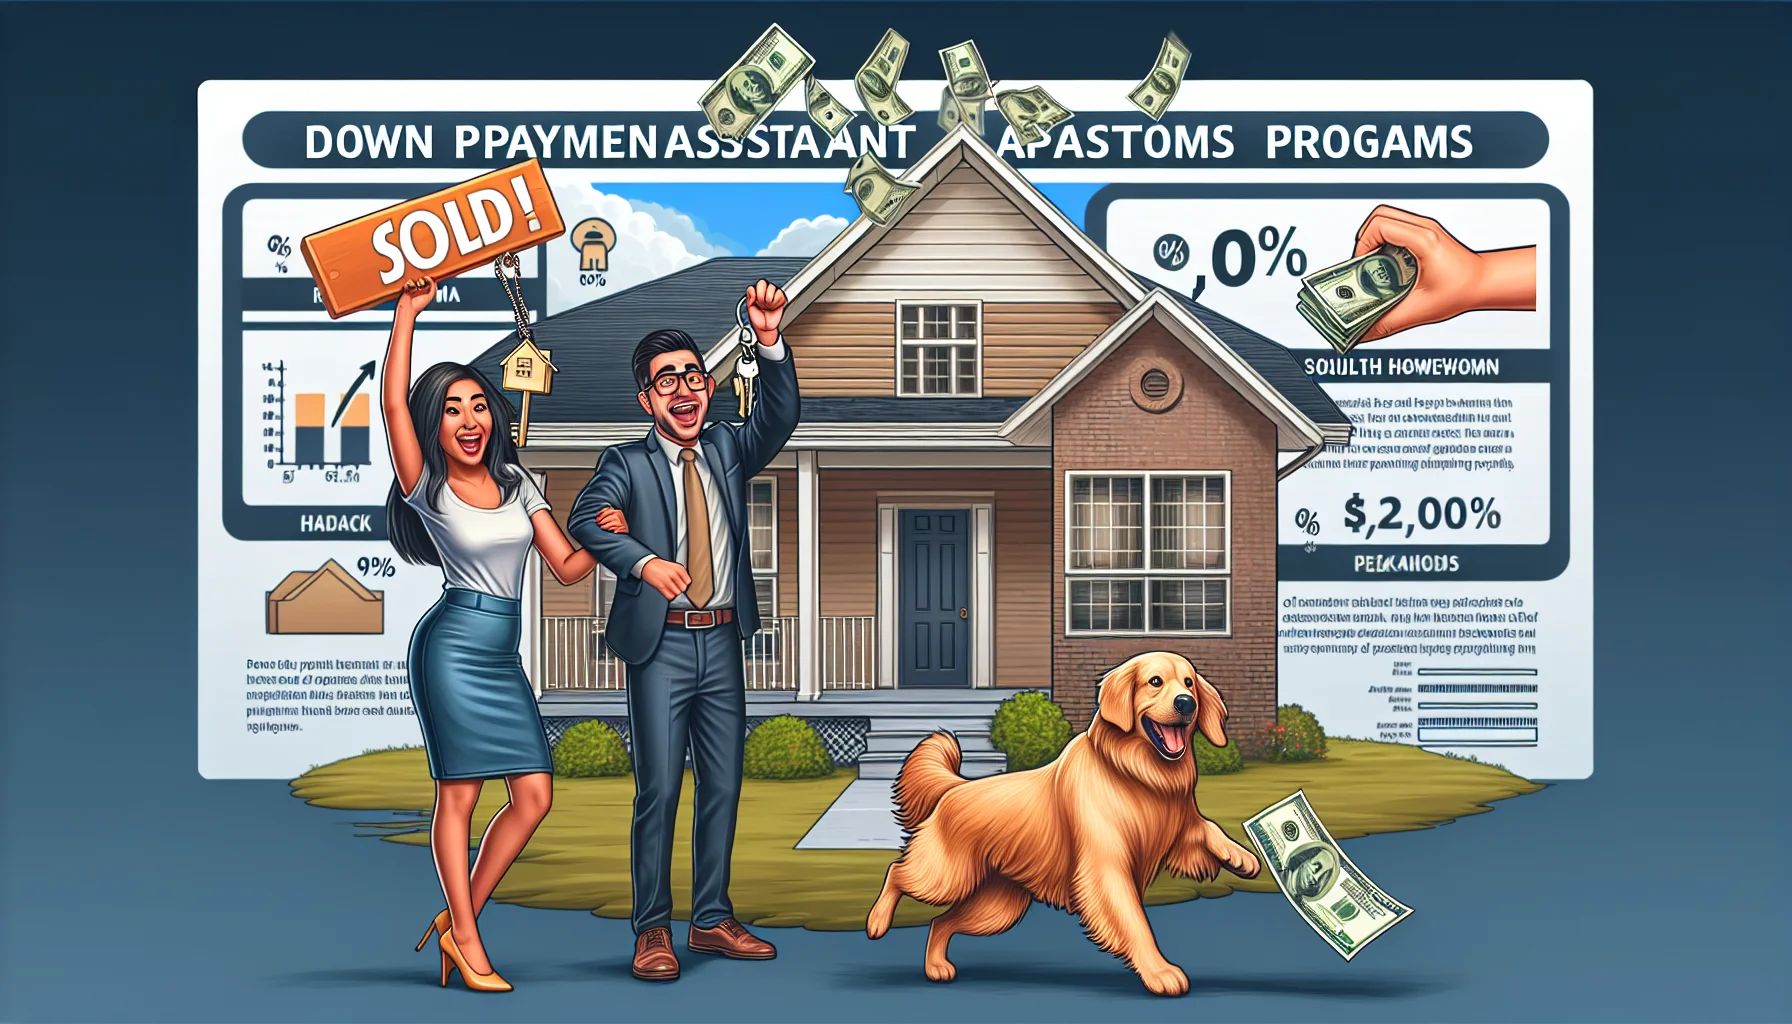 Create a humorous and realistic depiction of a perfect scenario regarding down payment assistance programs in Alabama. Include an ecstatic South Asian female real estate agent holding a sold sign in front of a charming, recently purchased house. The new homeowners, a Hispanic male and a Middle-Eastern female, are gleefully throwing their house keys in the air while their golden retriever catches them playfully. In the background, an explanatory infographic shows the highlights of Alabama's down payment assistance programs, with cash icons, percentages, and house icons, symbolizing the financial support provided.